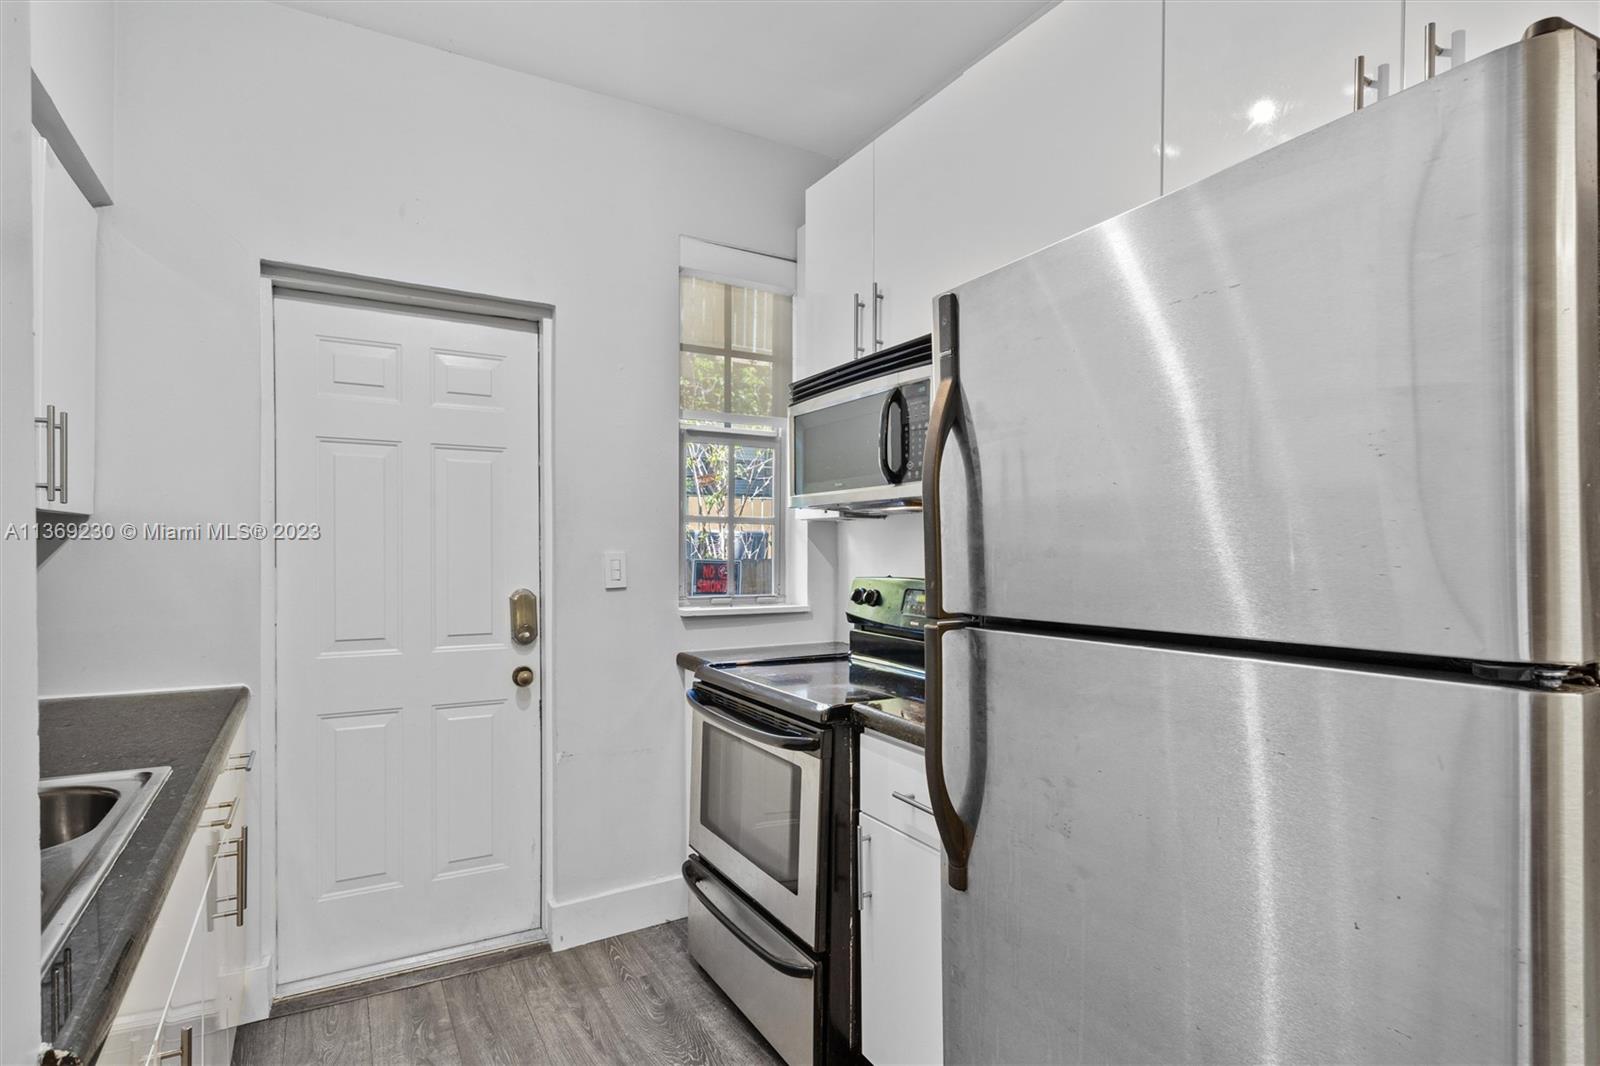 Renovated kitchen with granite counters & stainless steel appliances